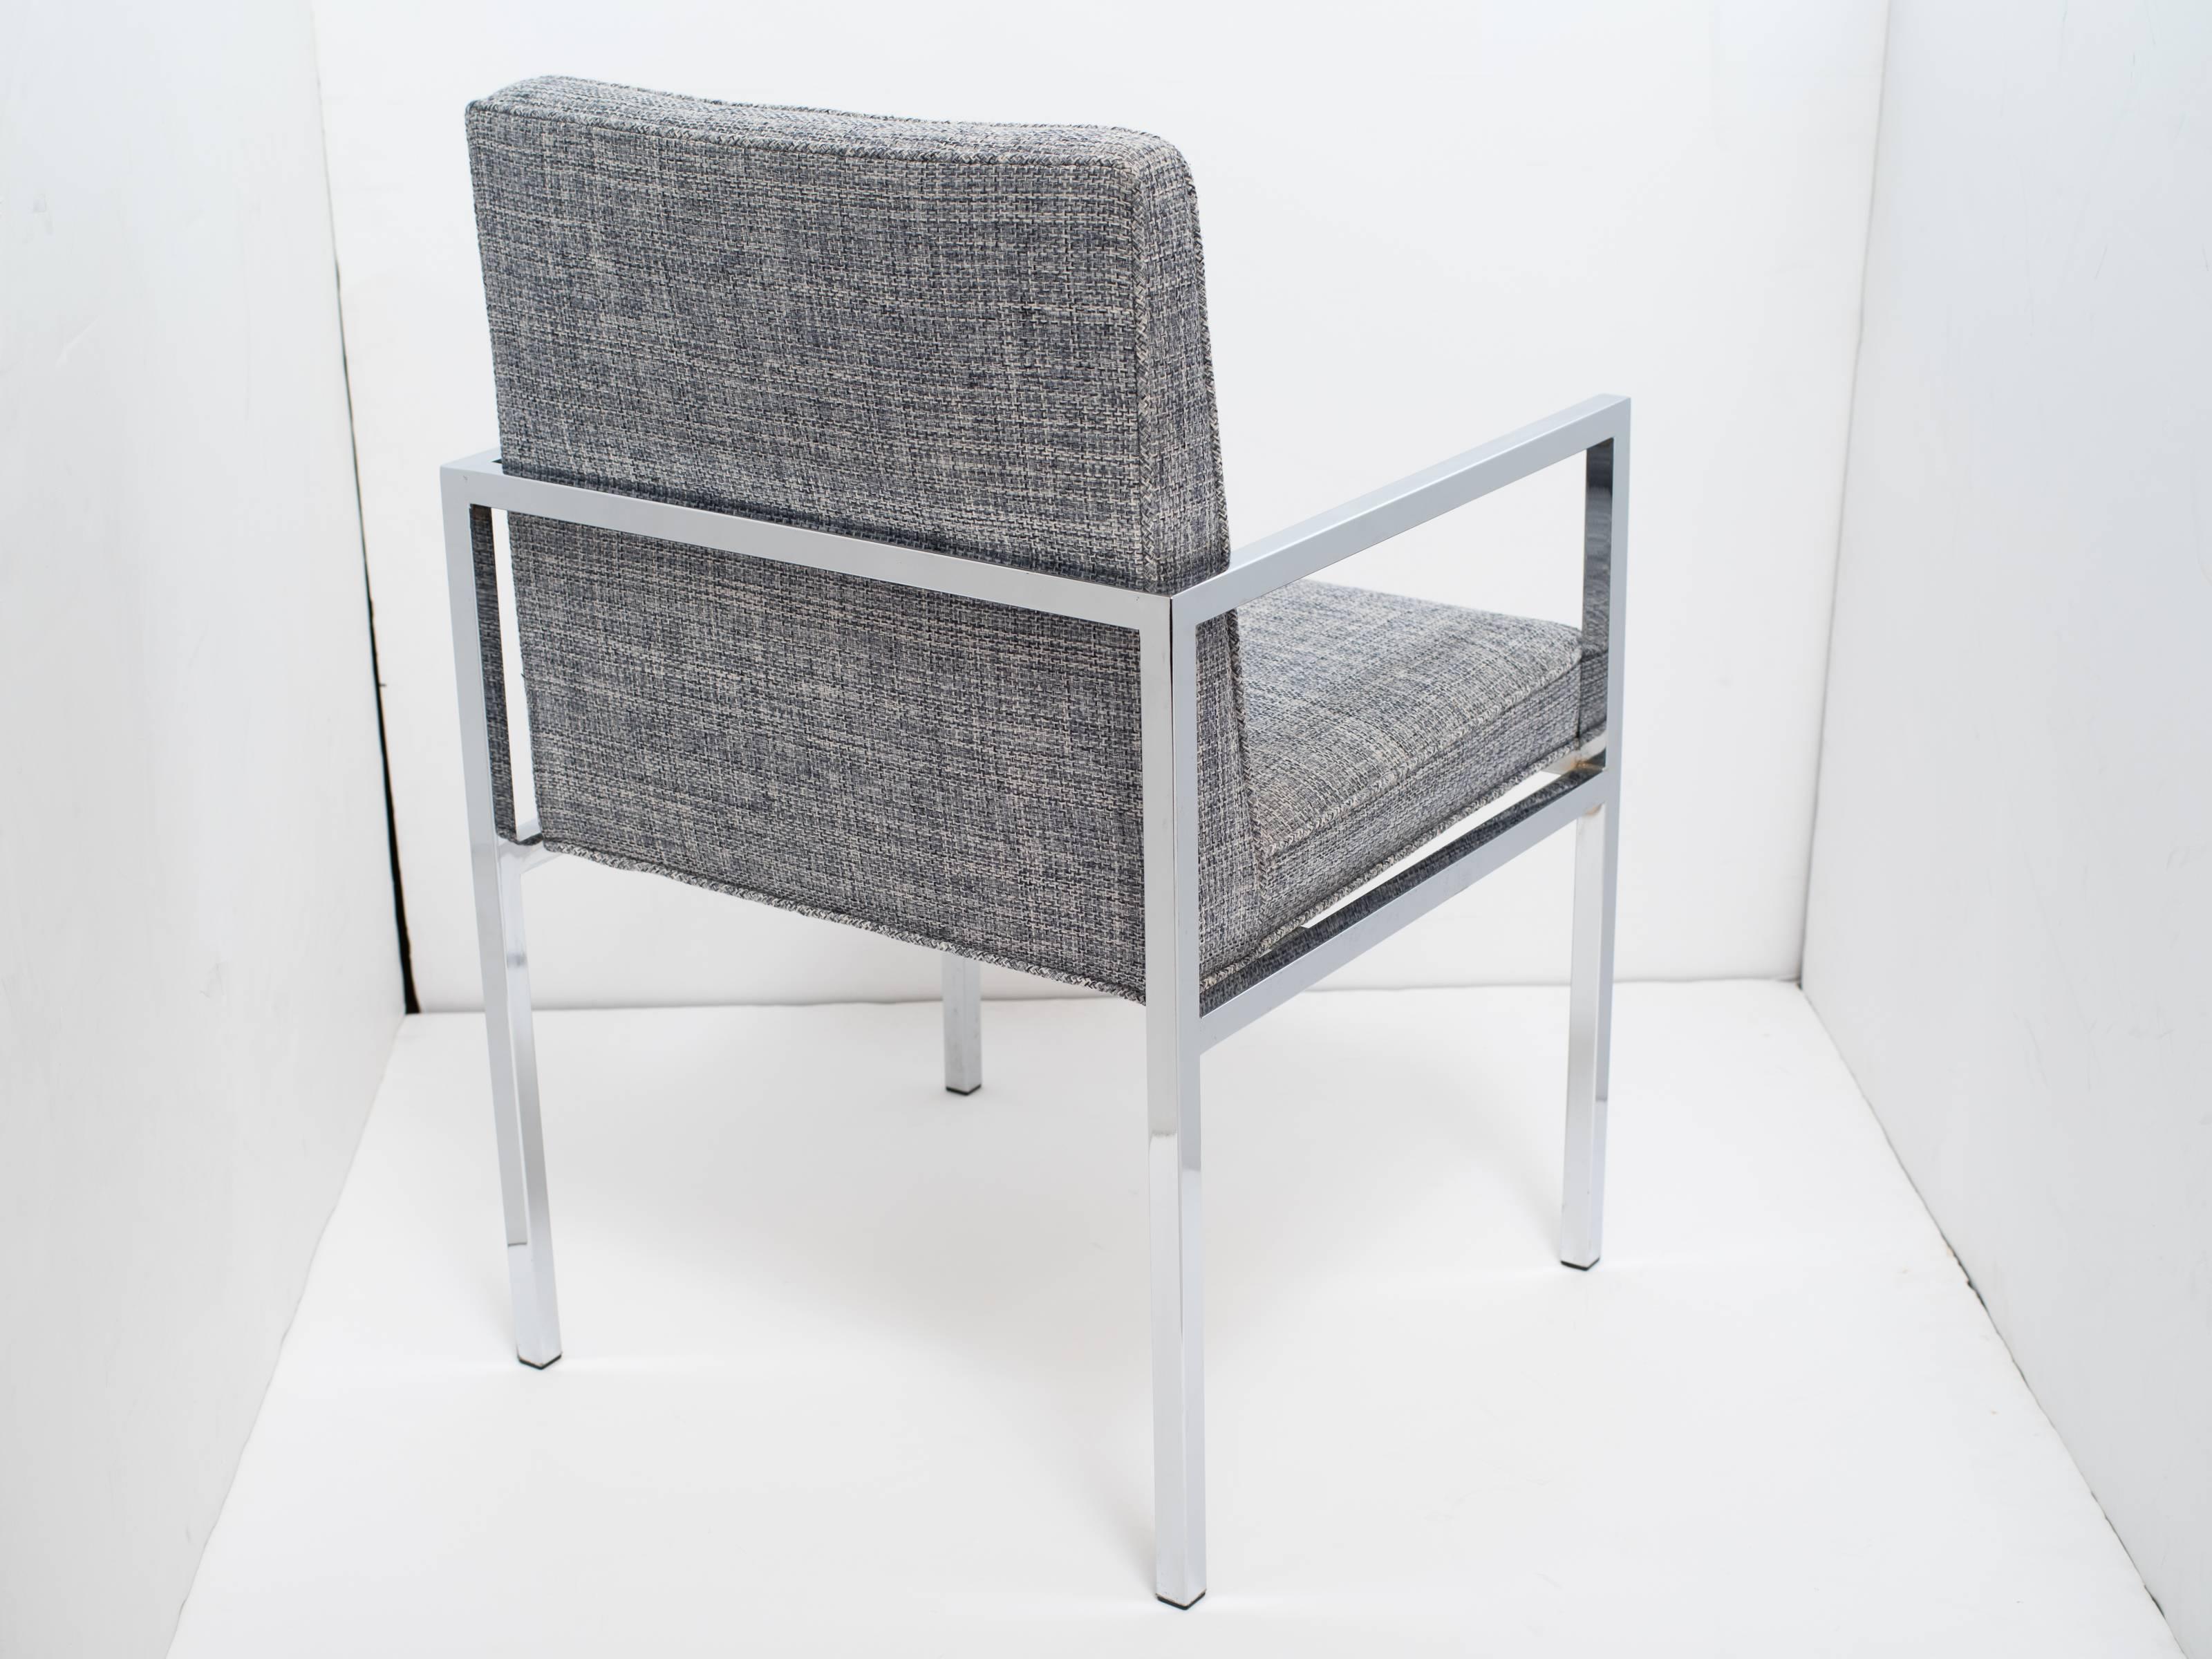 Polished Mid-Century Modern Chrome Desk Chair with Woven Upholstery, c. 1970's For Sale